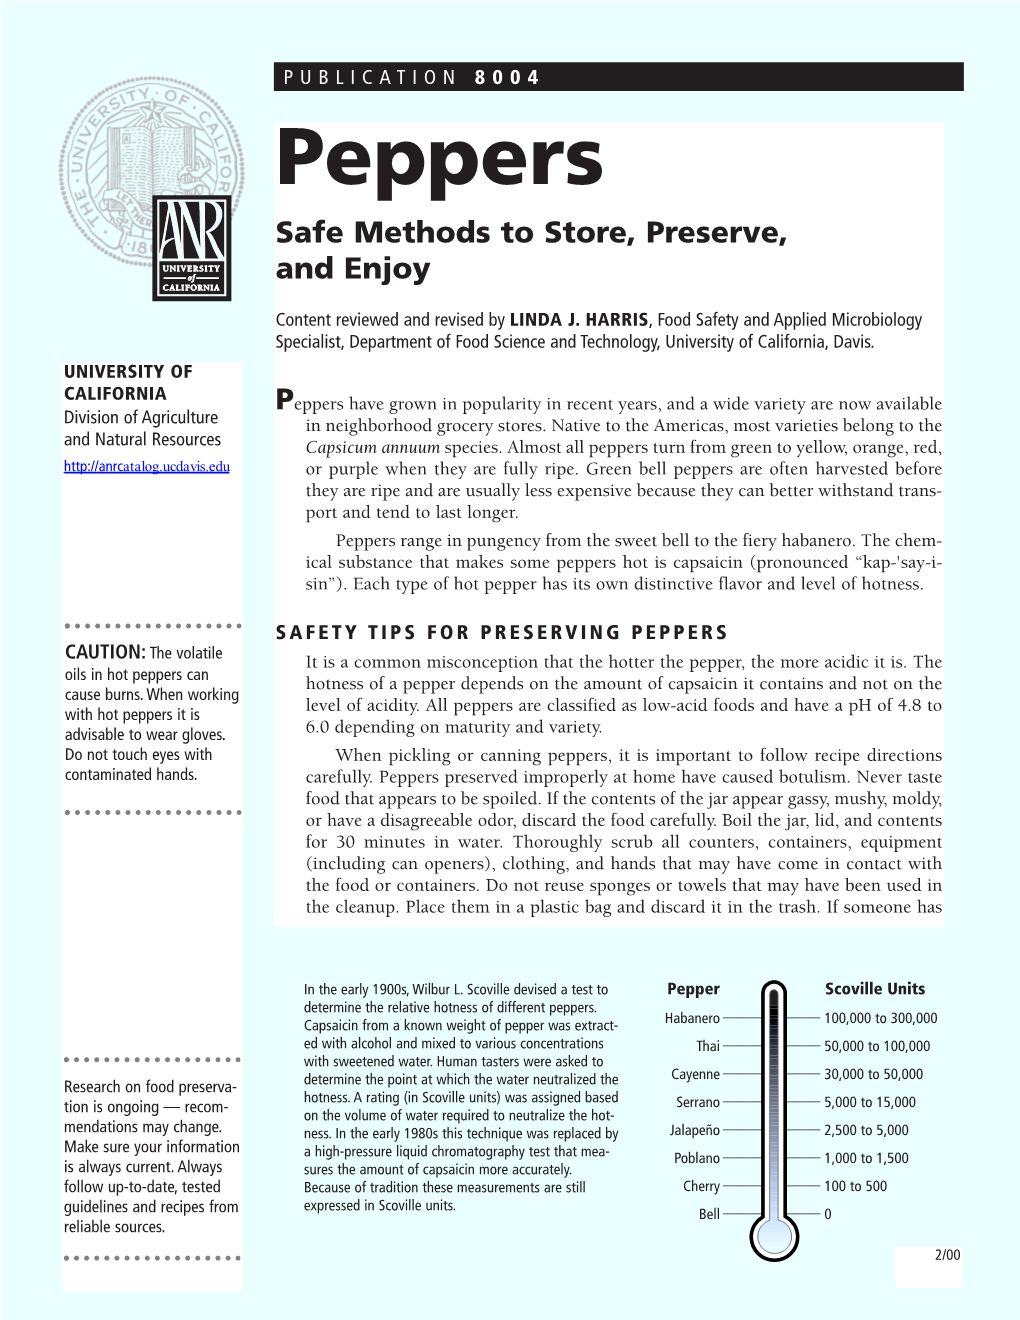 PEPPERS: Safe Methods to Store, Preserve, and Enjoy 2